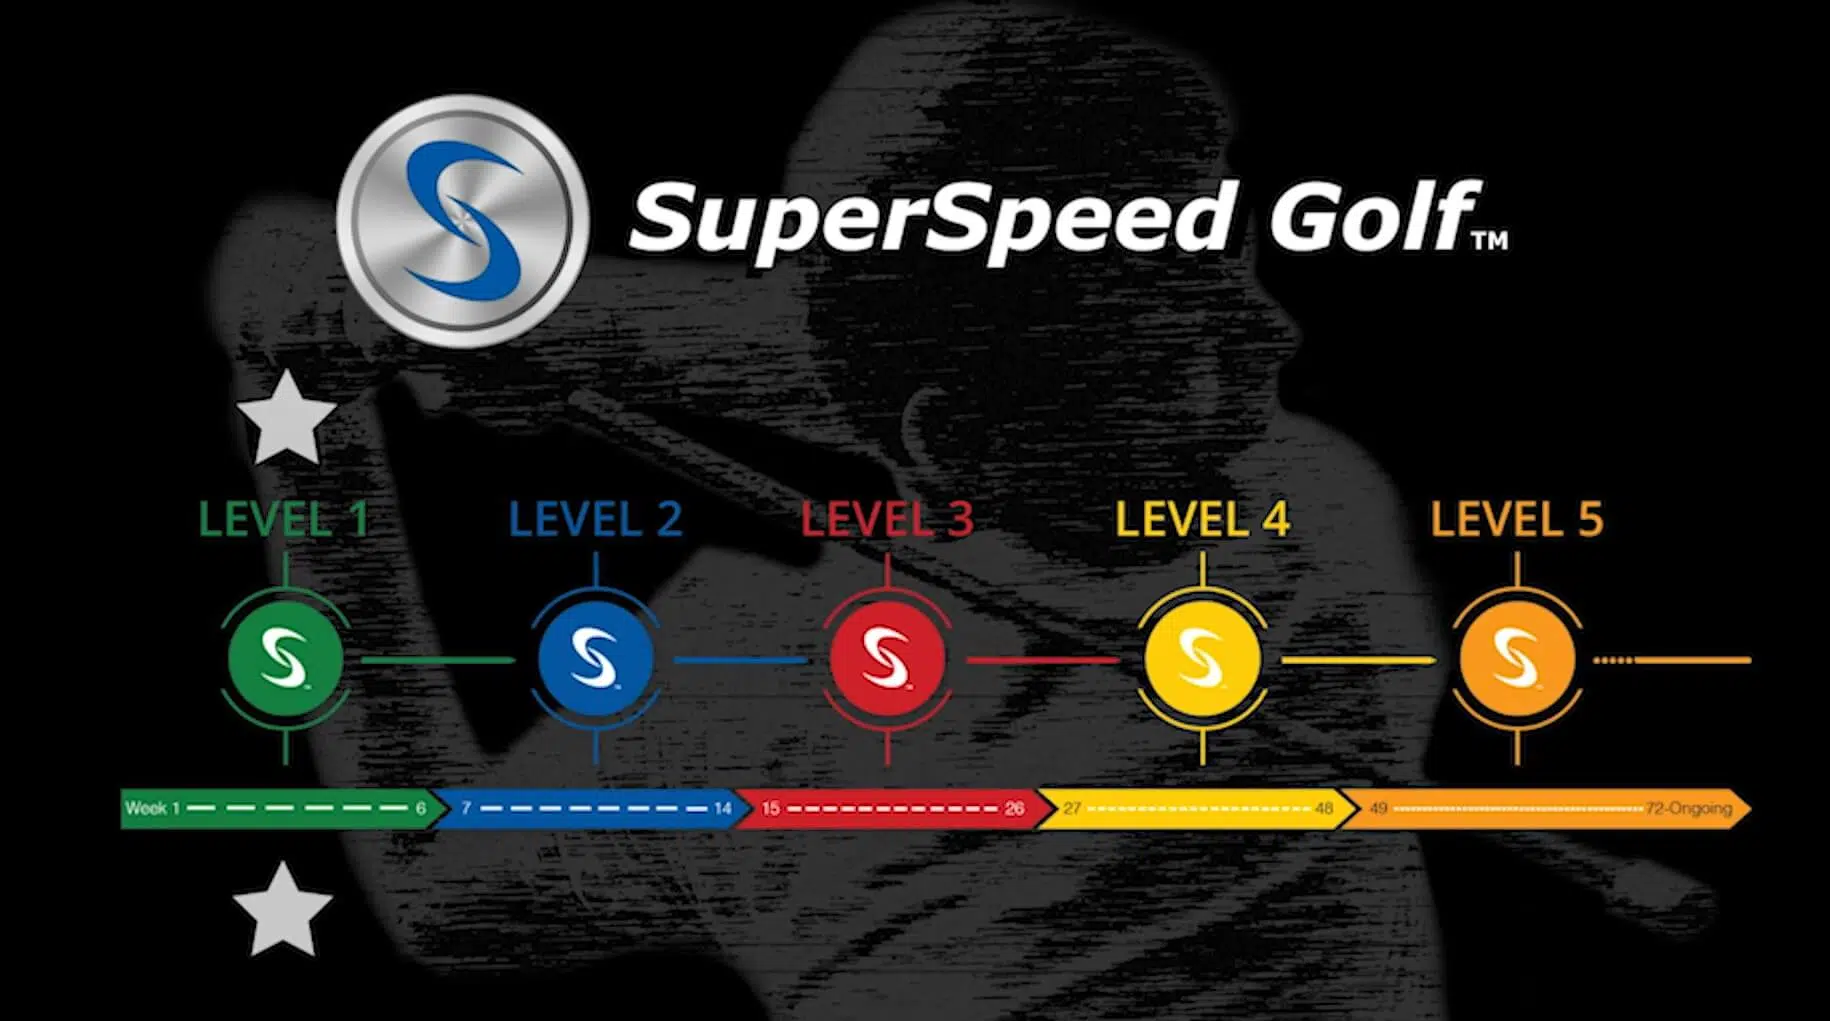 Superspeed Golf Protocol